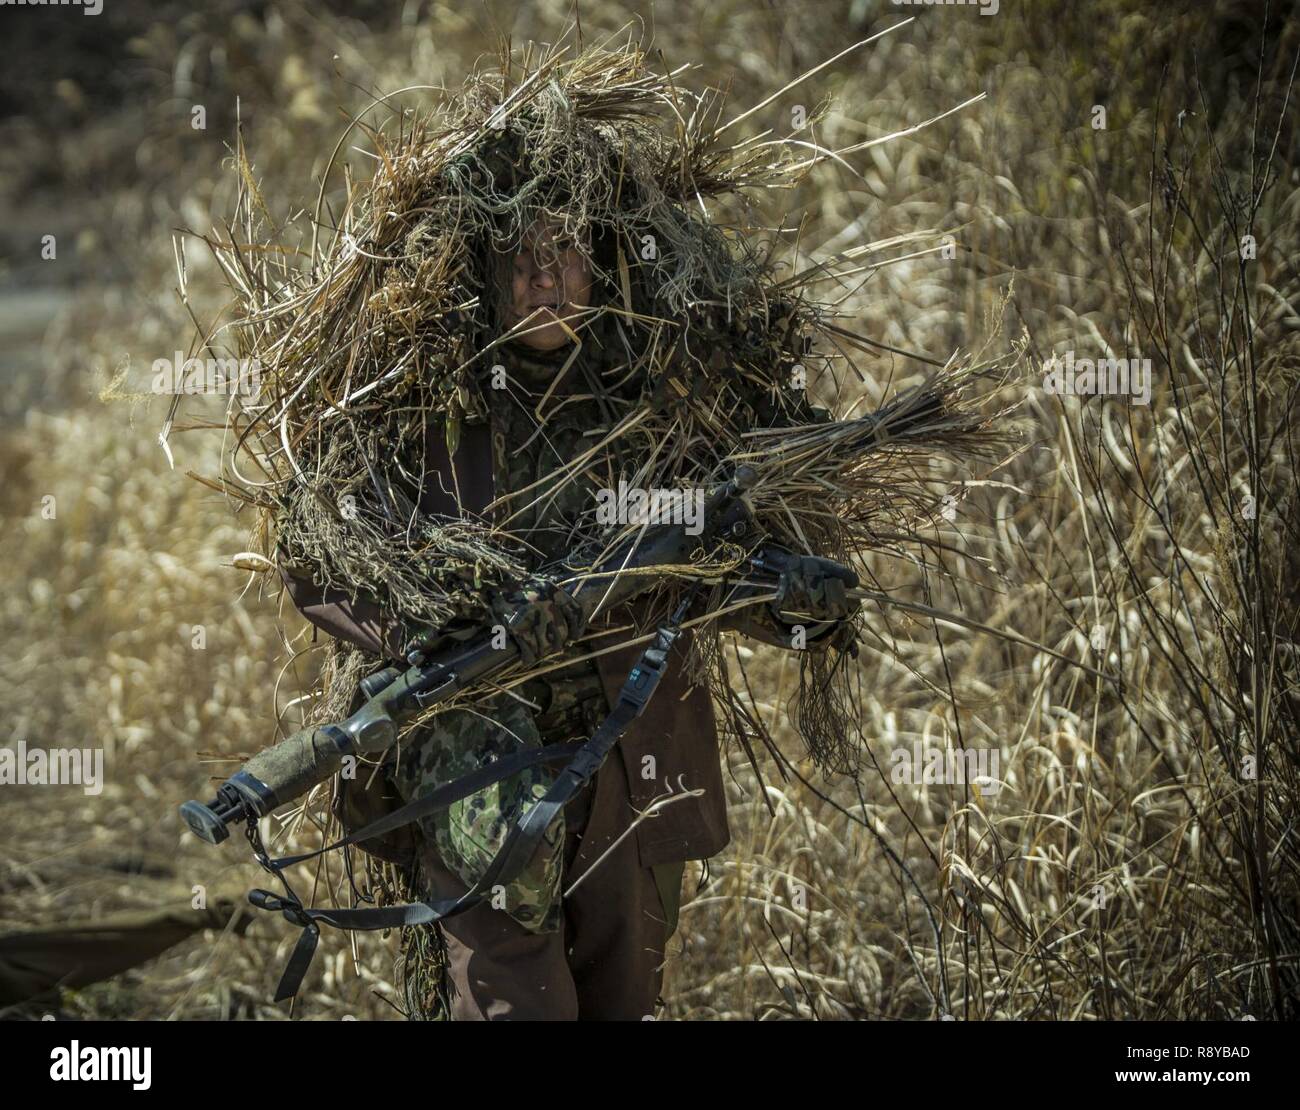 A Japan Ground Self-Defense Force scout sniper prepares his ghillie suit in during exercise Forest Light 17-1 at Somagahara, Japan, March 10, 2017. Forest Light is one of various bi-lateral training opportunities conducted by JGSD and deployed U.S. Marine forces to demonstrate the enduring commitment by both countries to peace, stability, and prosperity across the region. The Japanese soldiers are with 30th Infantry Regiment and partnering with Marines from 2nd Battalion, 3rd Marine Regiment. Stock Photo